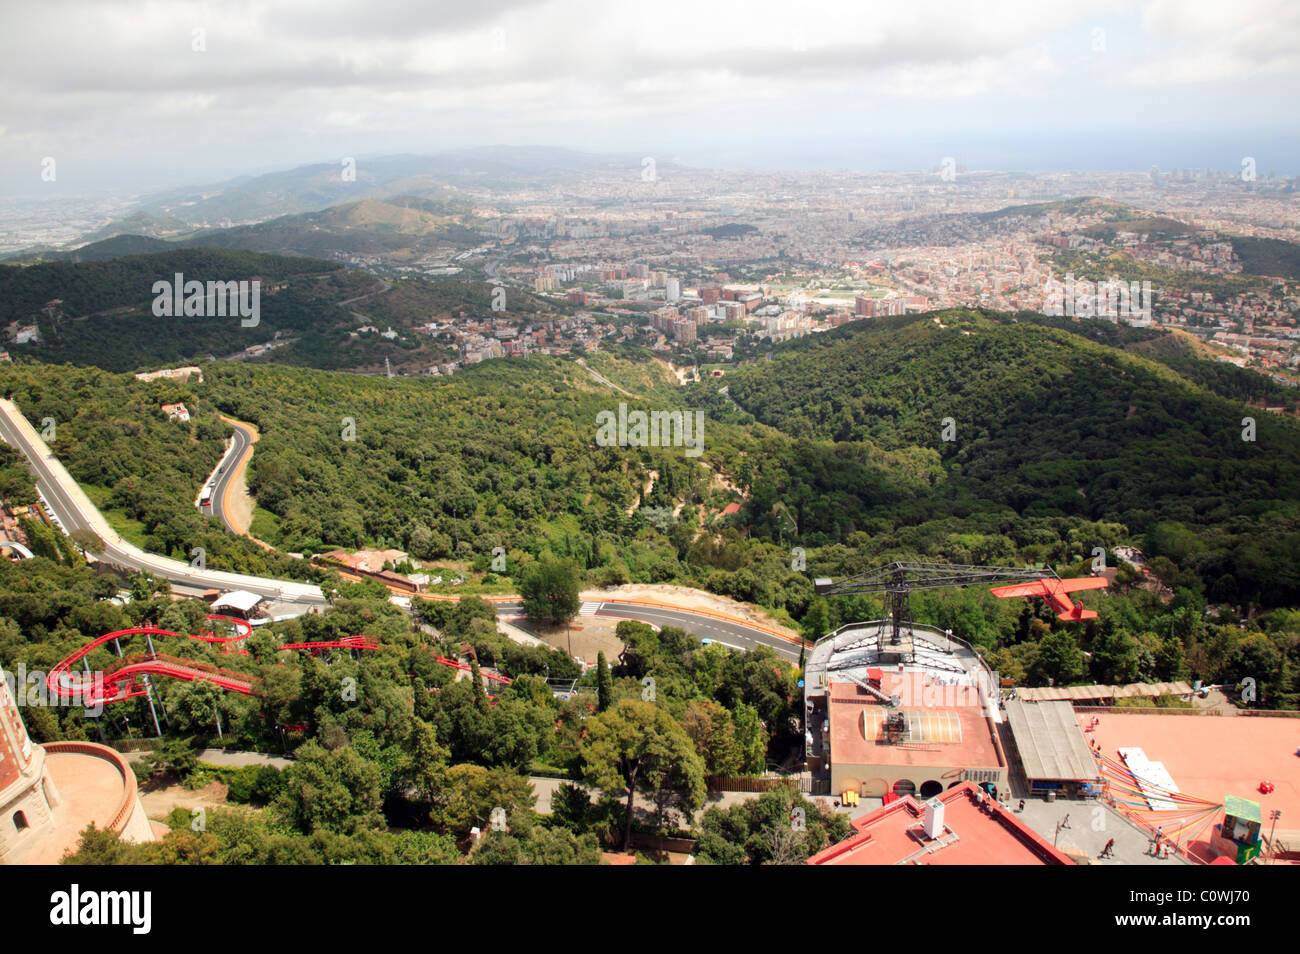 Wide-angle view of Barcelona’s suburbs and the Tibidabo Theme Park, Bottom right, the Vintage Avio plane ride is in operation Stock Photo